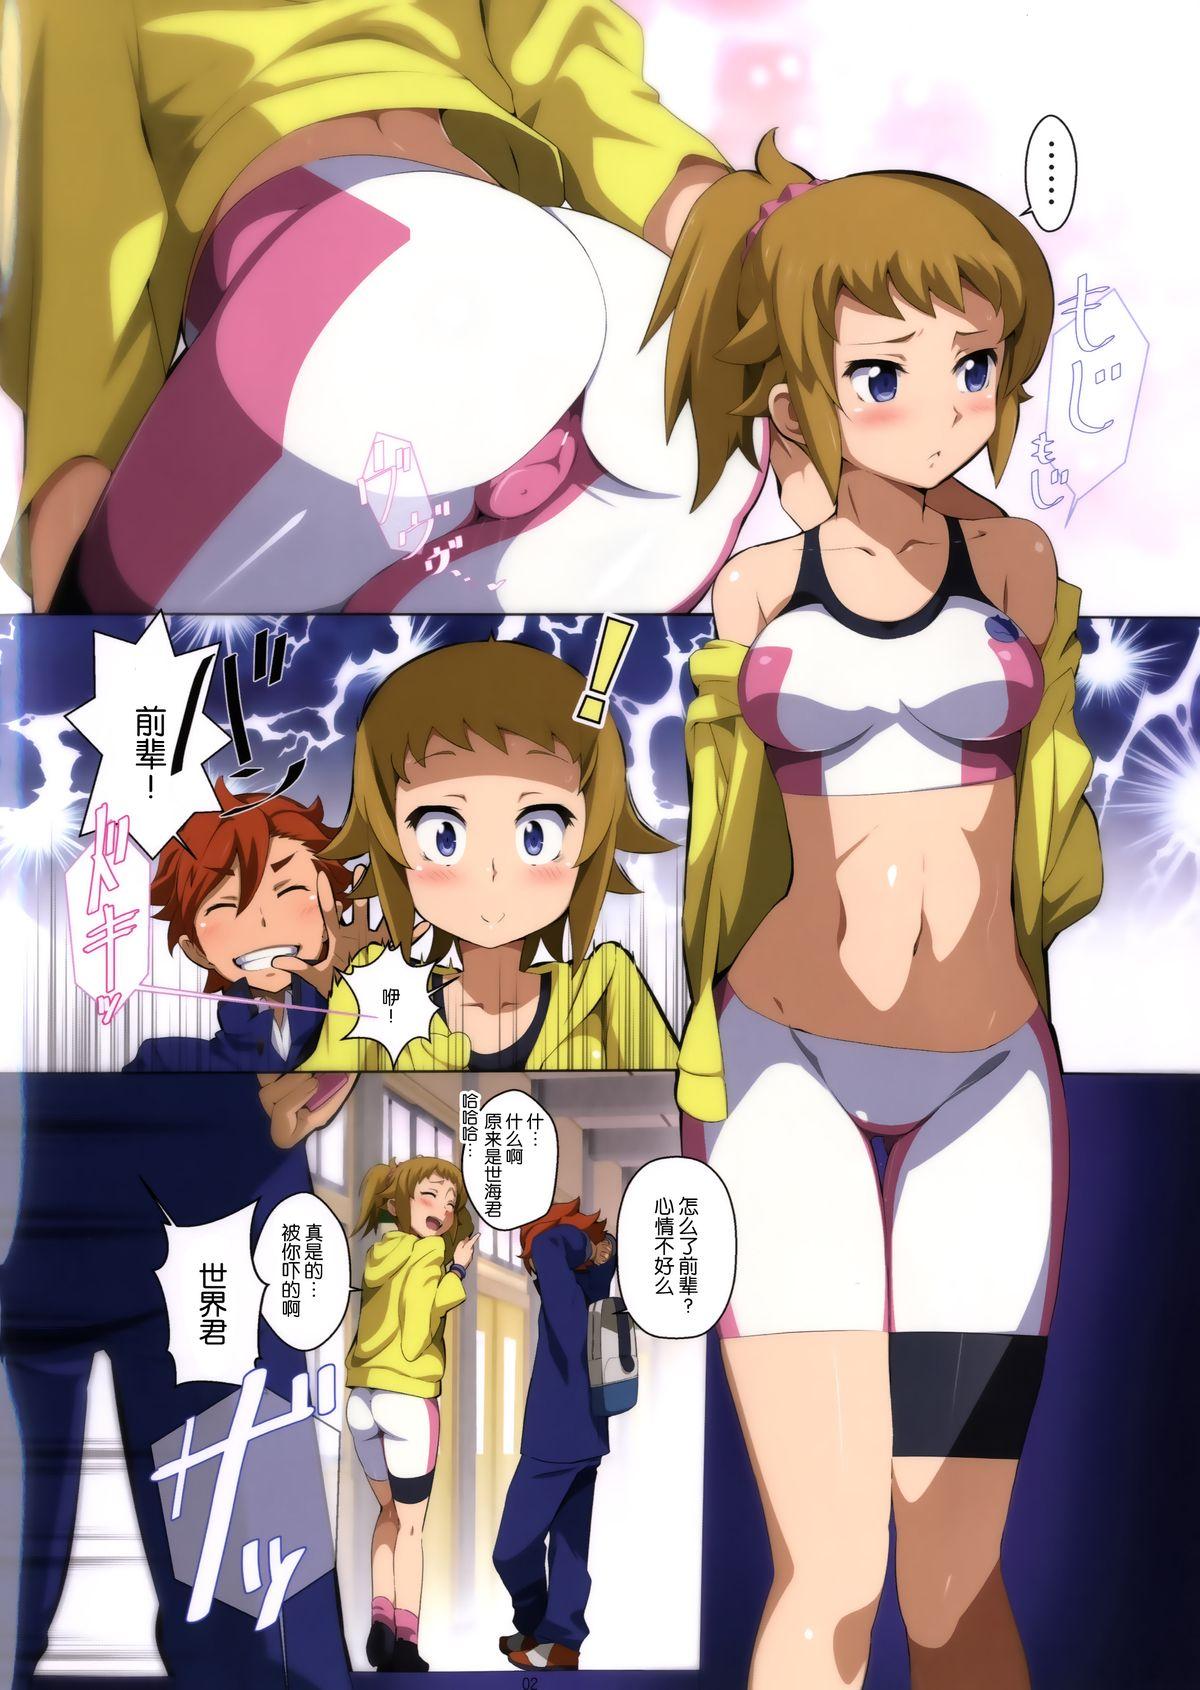 Escort BATTLE END FUMINA - Gundam build fighters try Rimjob - Page 3